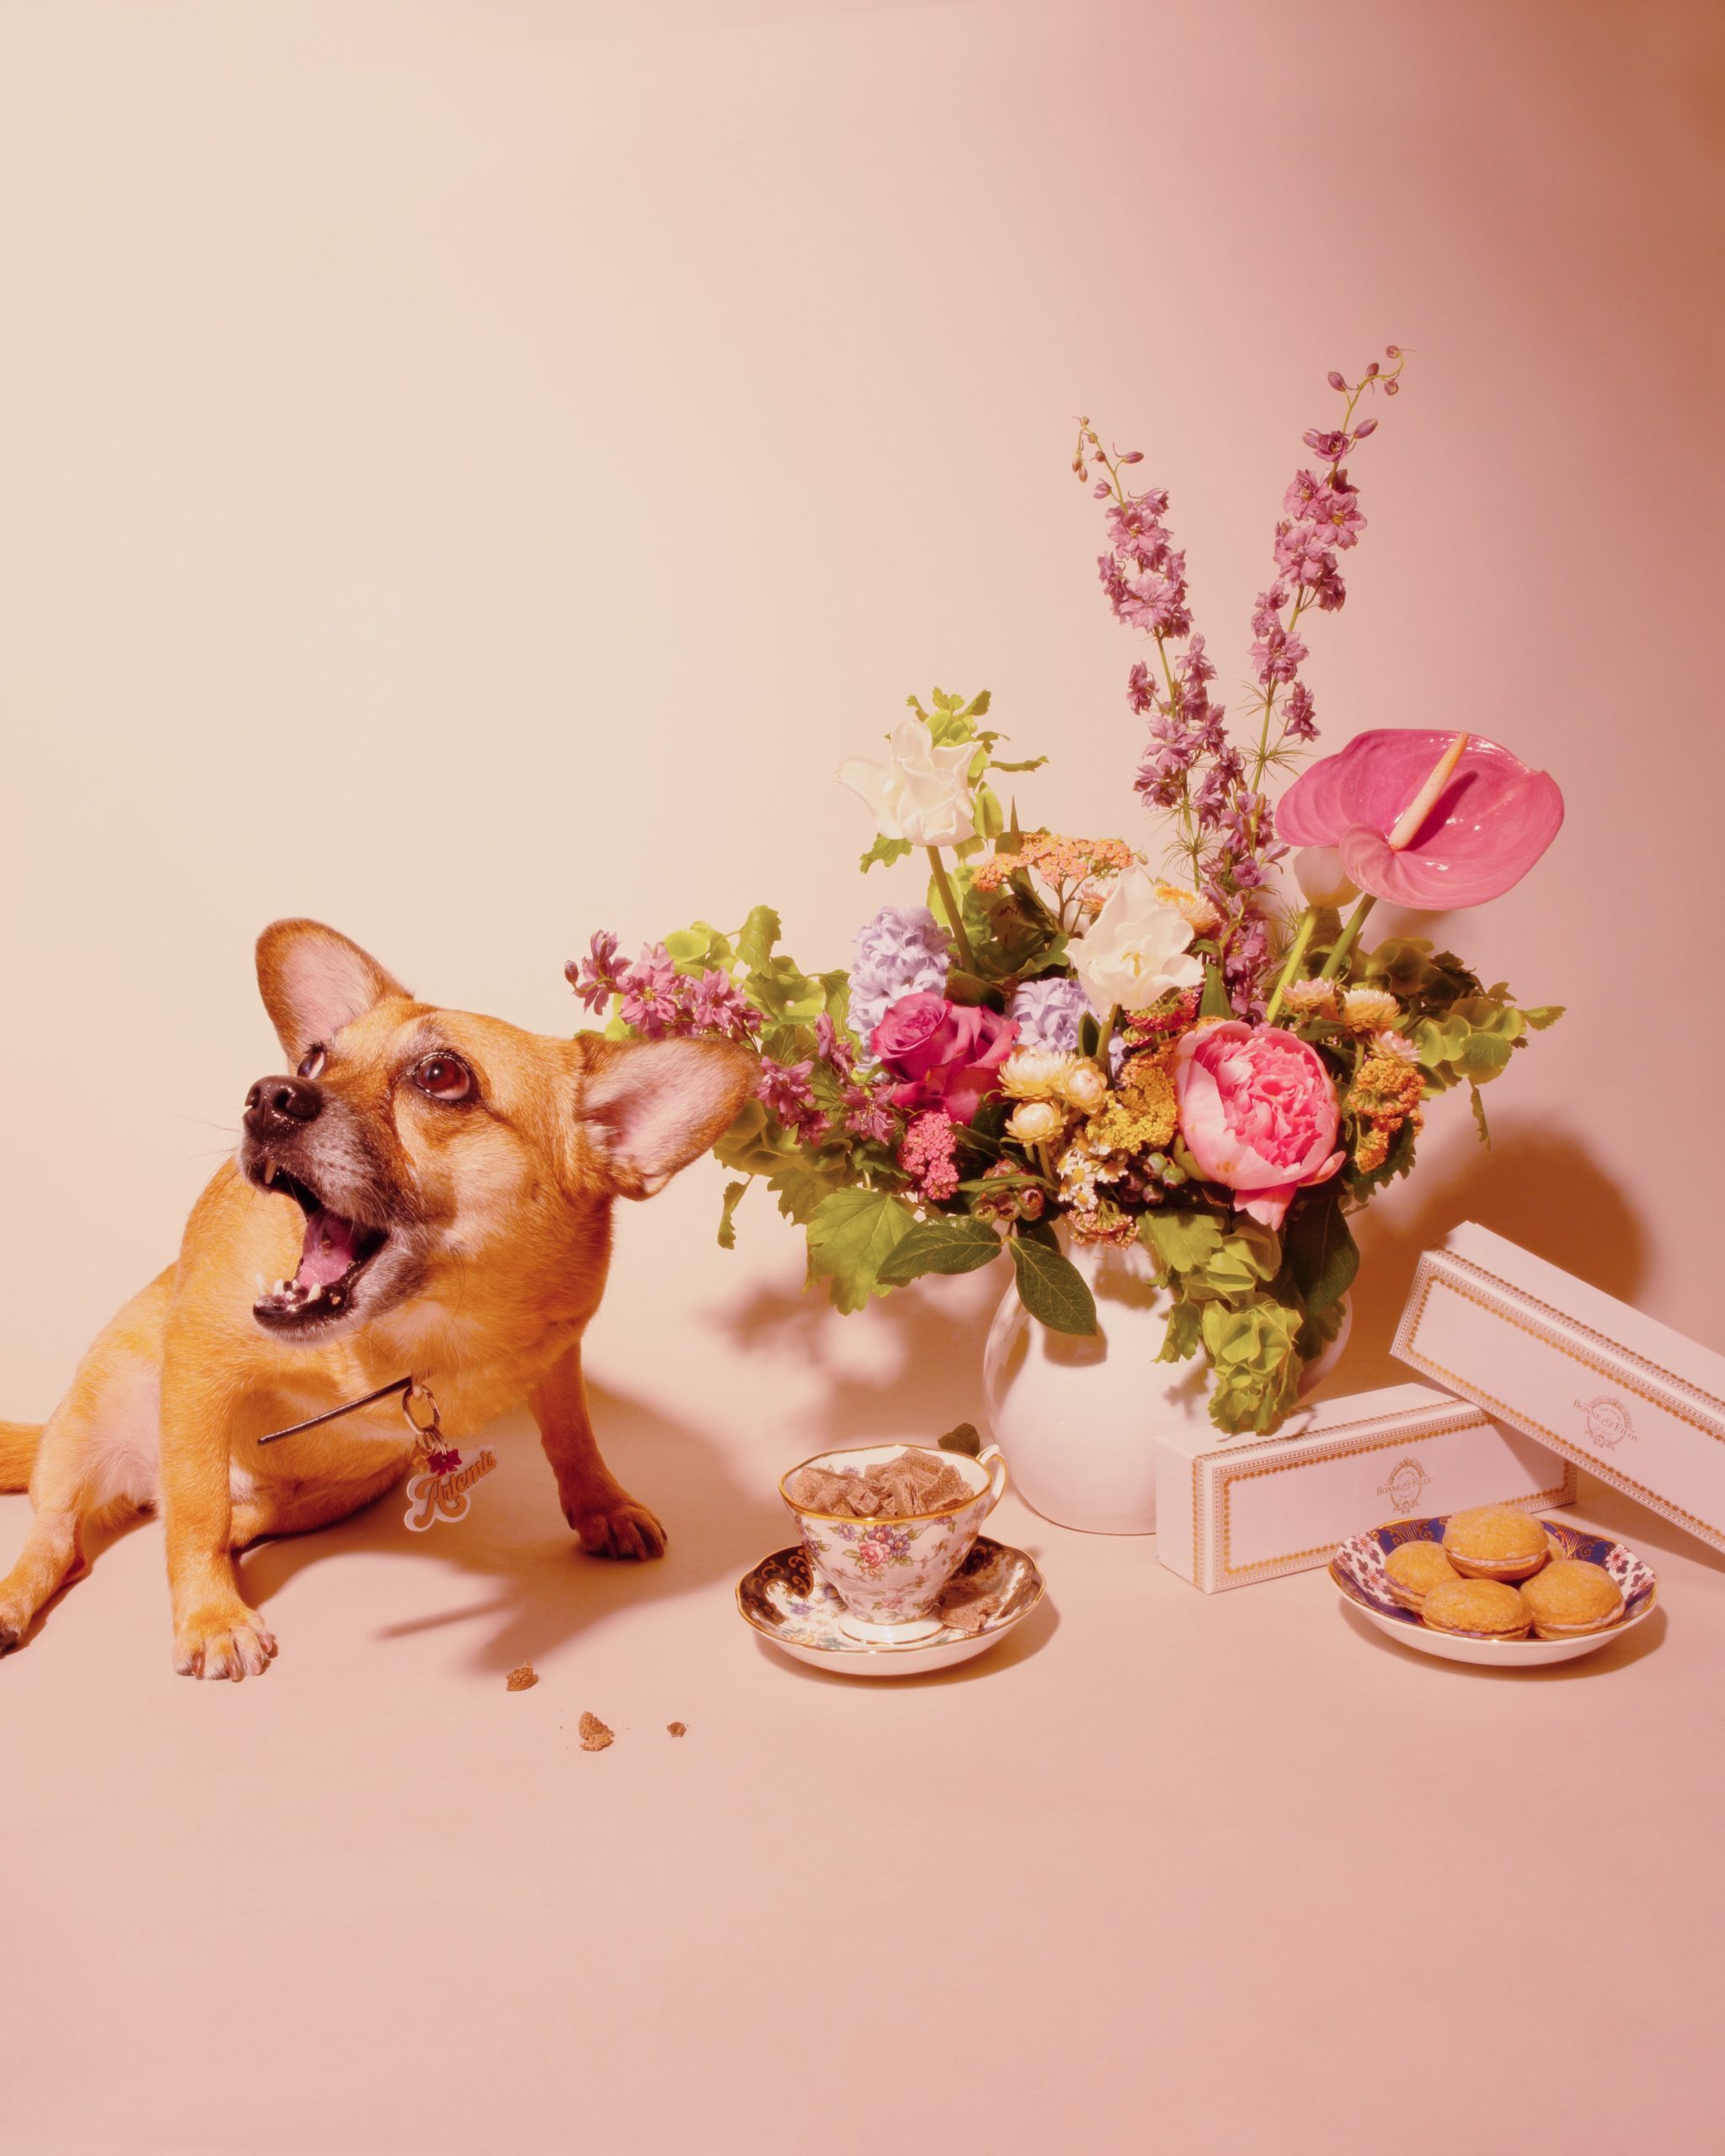 French-inspired dog treats for Argos & Artemis, photographed by Tayler Smith.